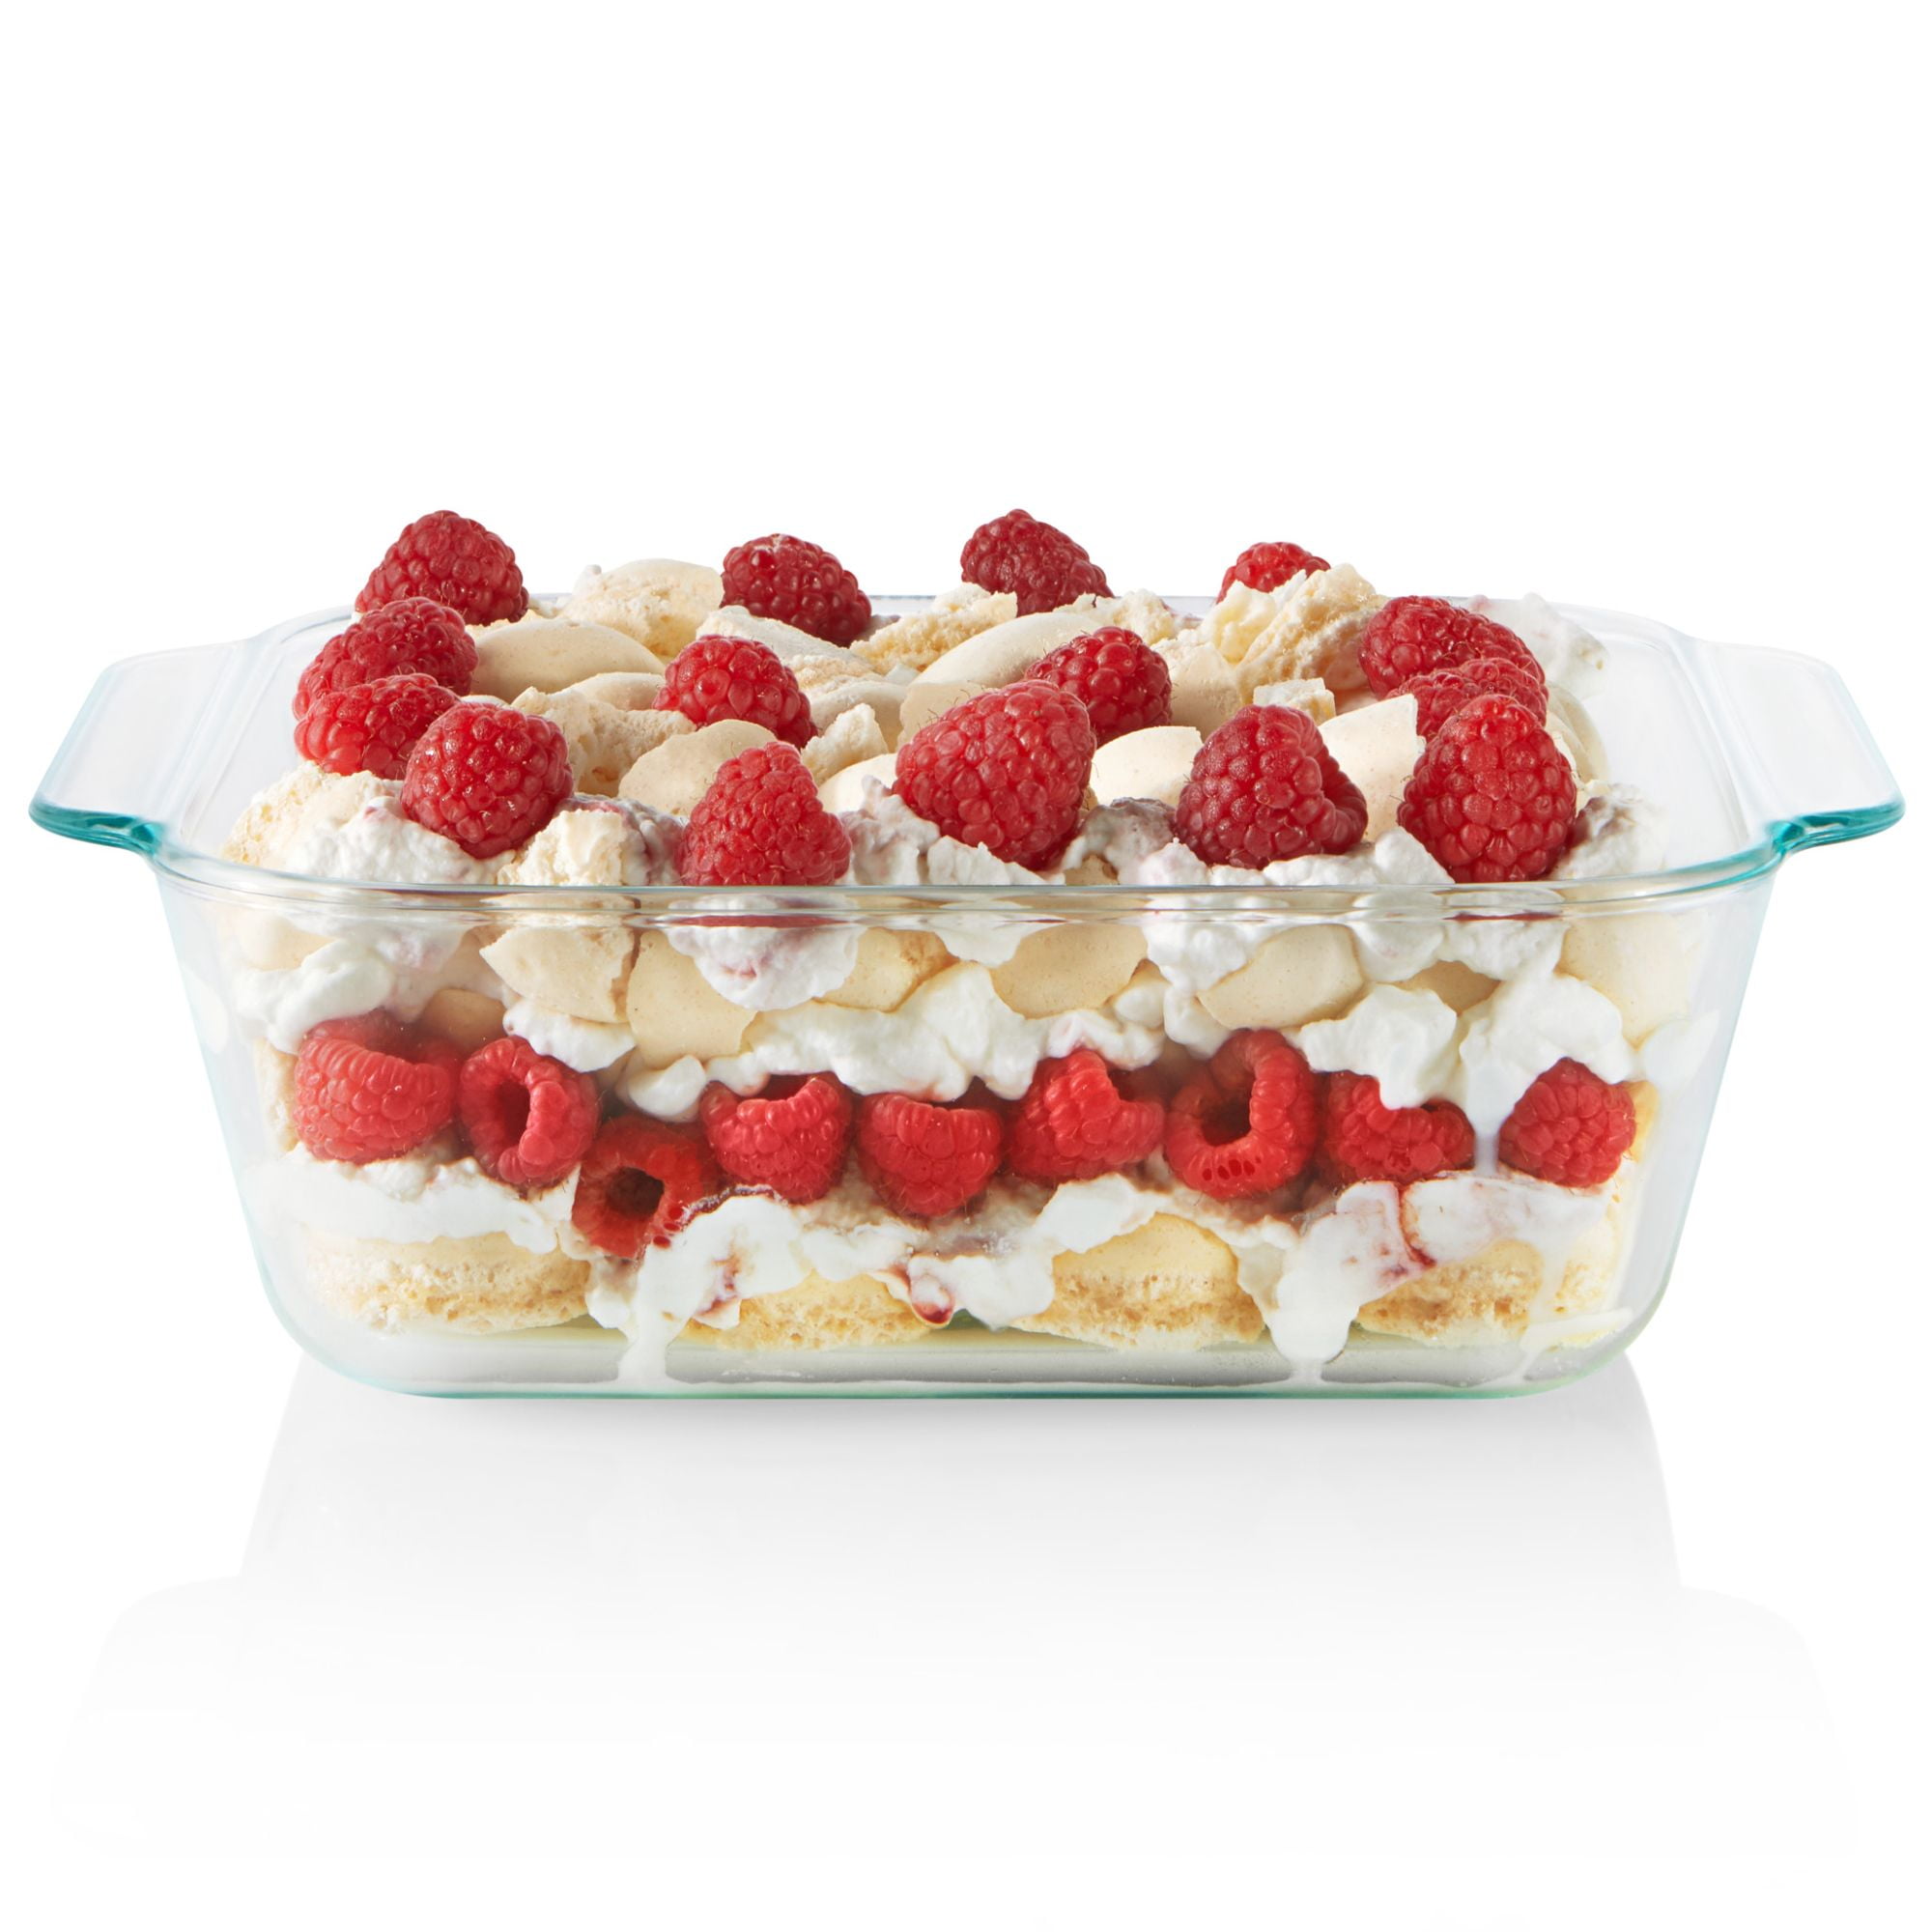 Pyrex 8 In. x 12 In. Divided Glass Bakeware - Power Townsend Company